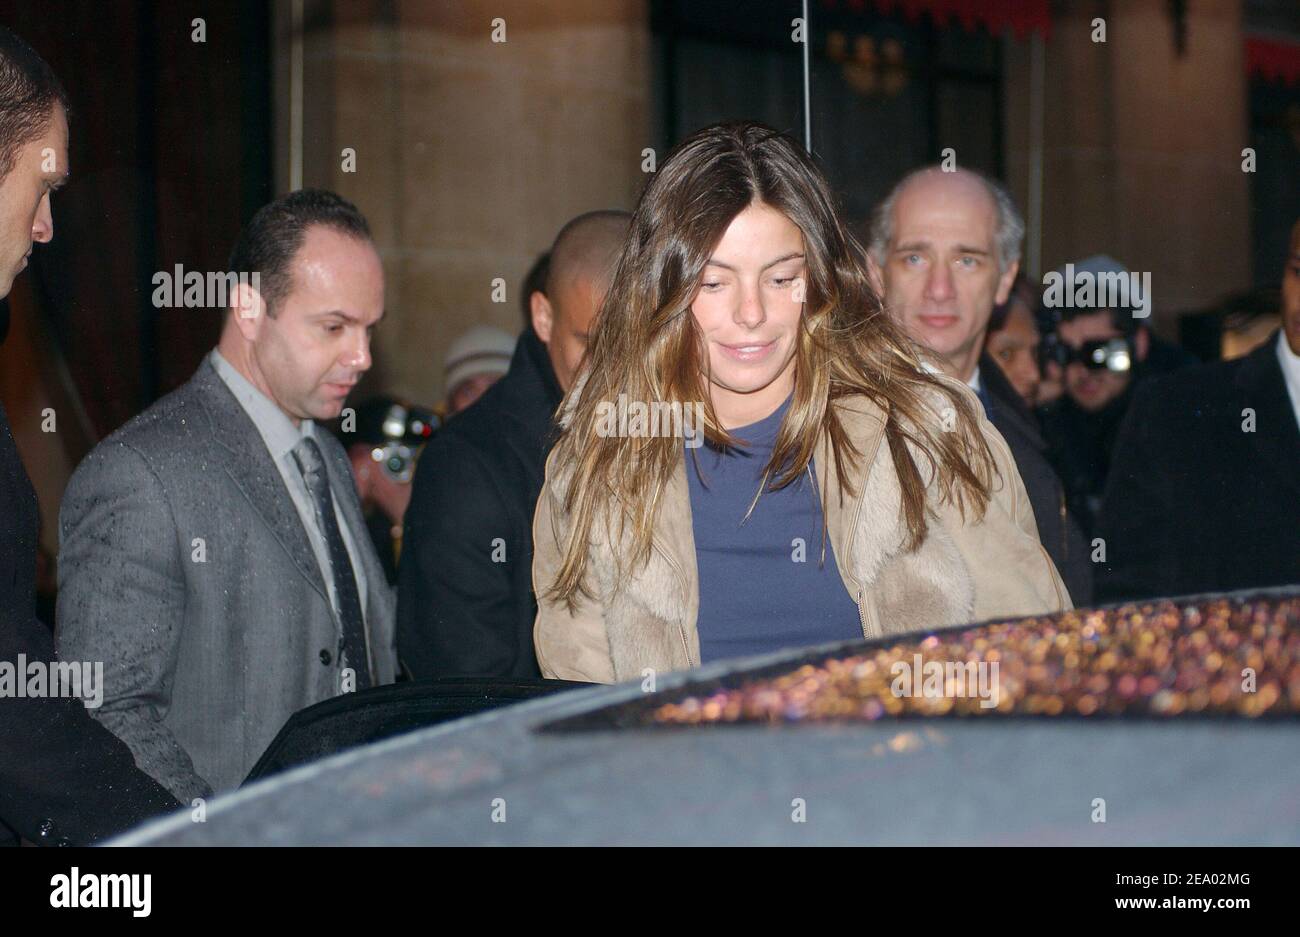 Brazilian football player Ronaldo set to marry Brazilian model Daniela Cicarelli at the Chateau de Chantilly in France on February 14, 2005. They leave Plaza Athenee hotel in Paris, France to go at Chateau de Chantilly for the evening party. Photo by Gorassini-Hounsfield-Klein-Mousse-Zabulon/ABACA. Stock Photo